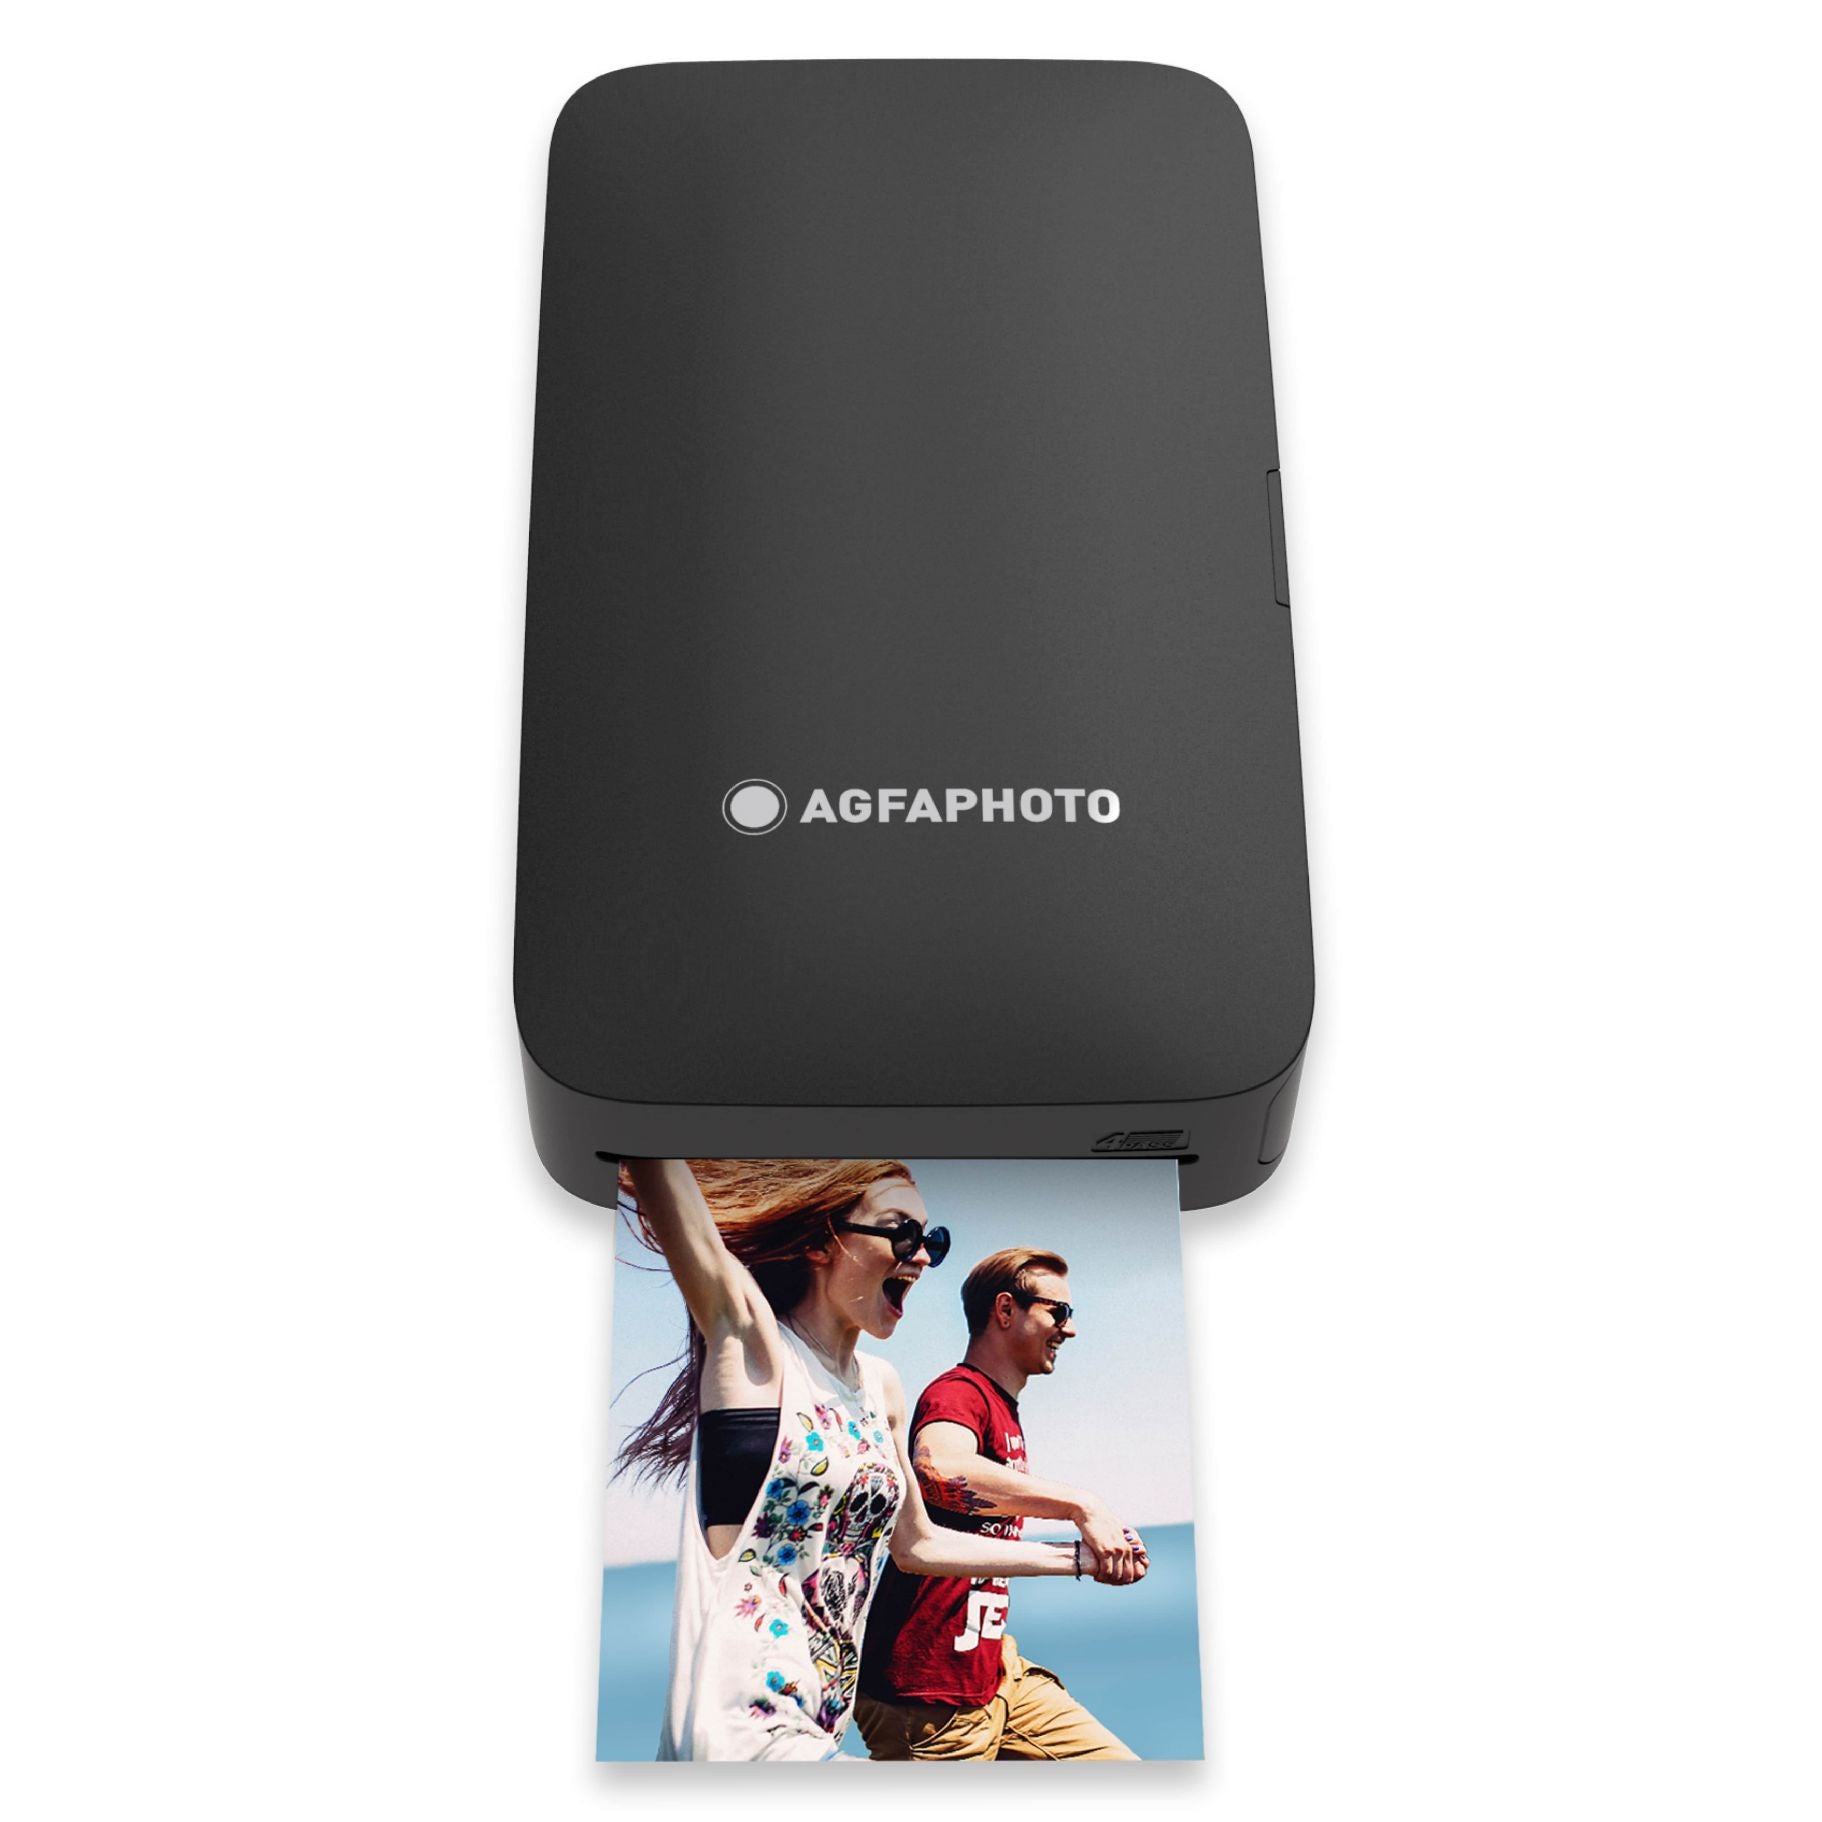 Portable Photo Printer - AgfaPhoto Realipix Mini P.2 ZINK - 10 papers  included